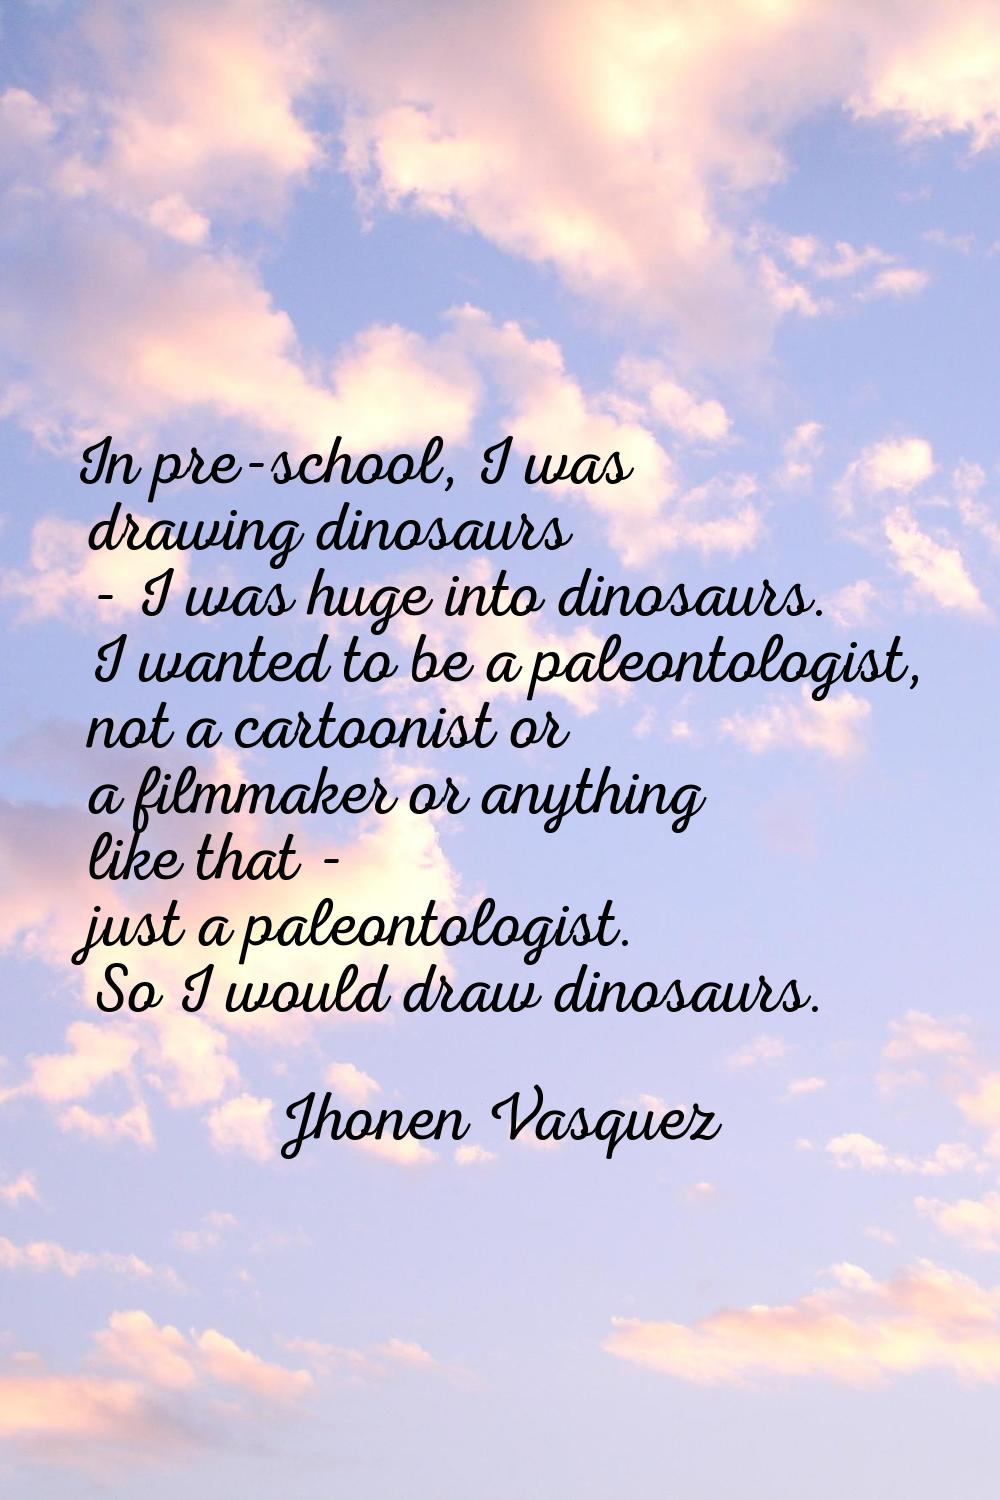 In pre-school, I was drawing dinosaurs - I was huge into dinosaurs. I wanted to be a paleontologist